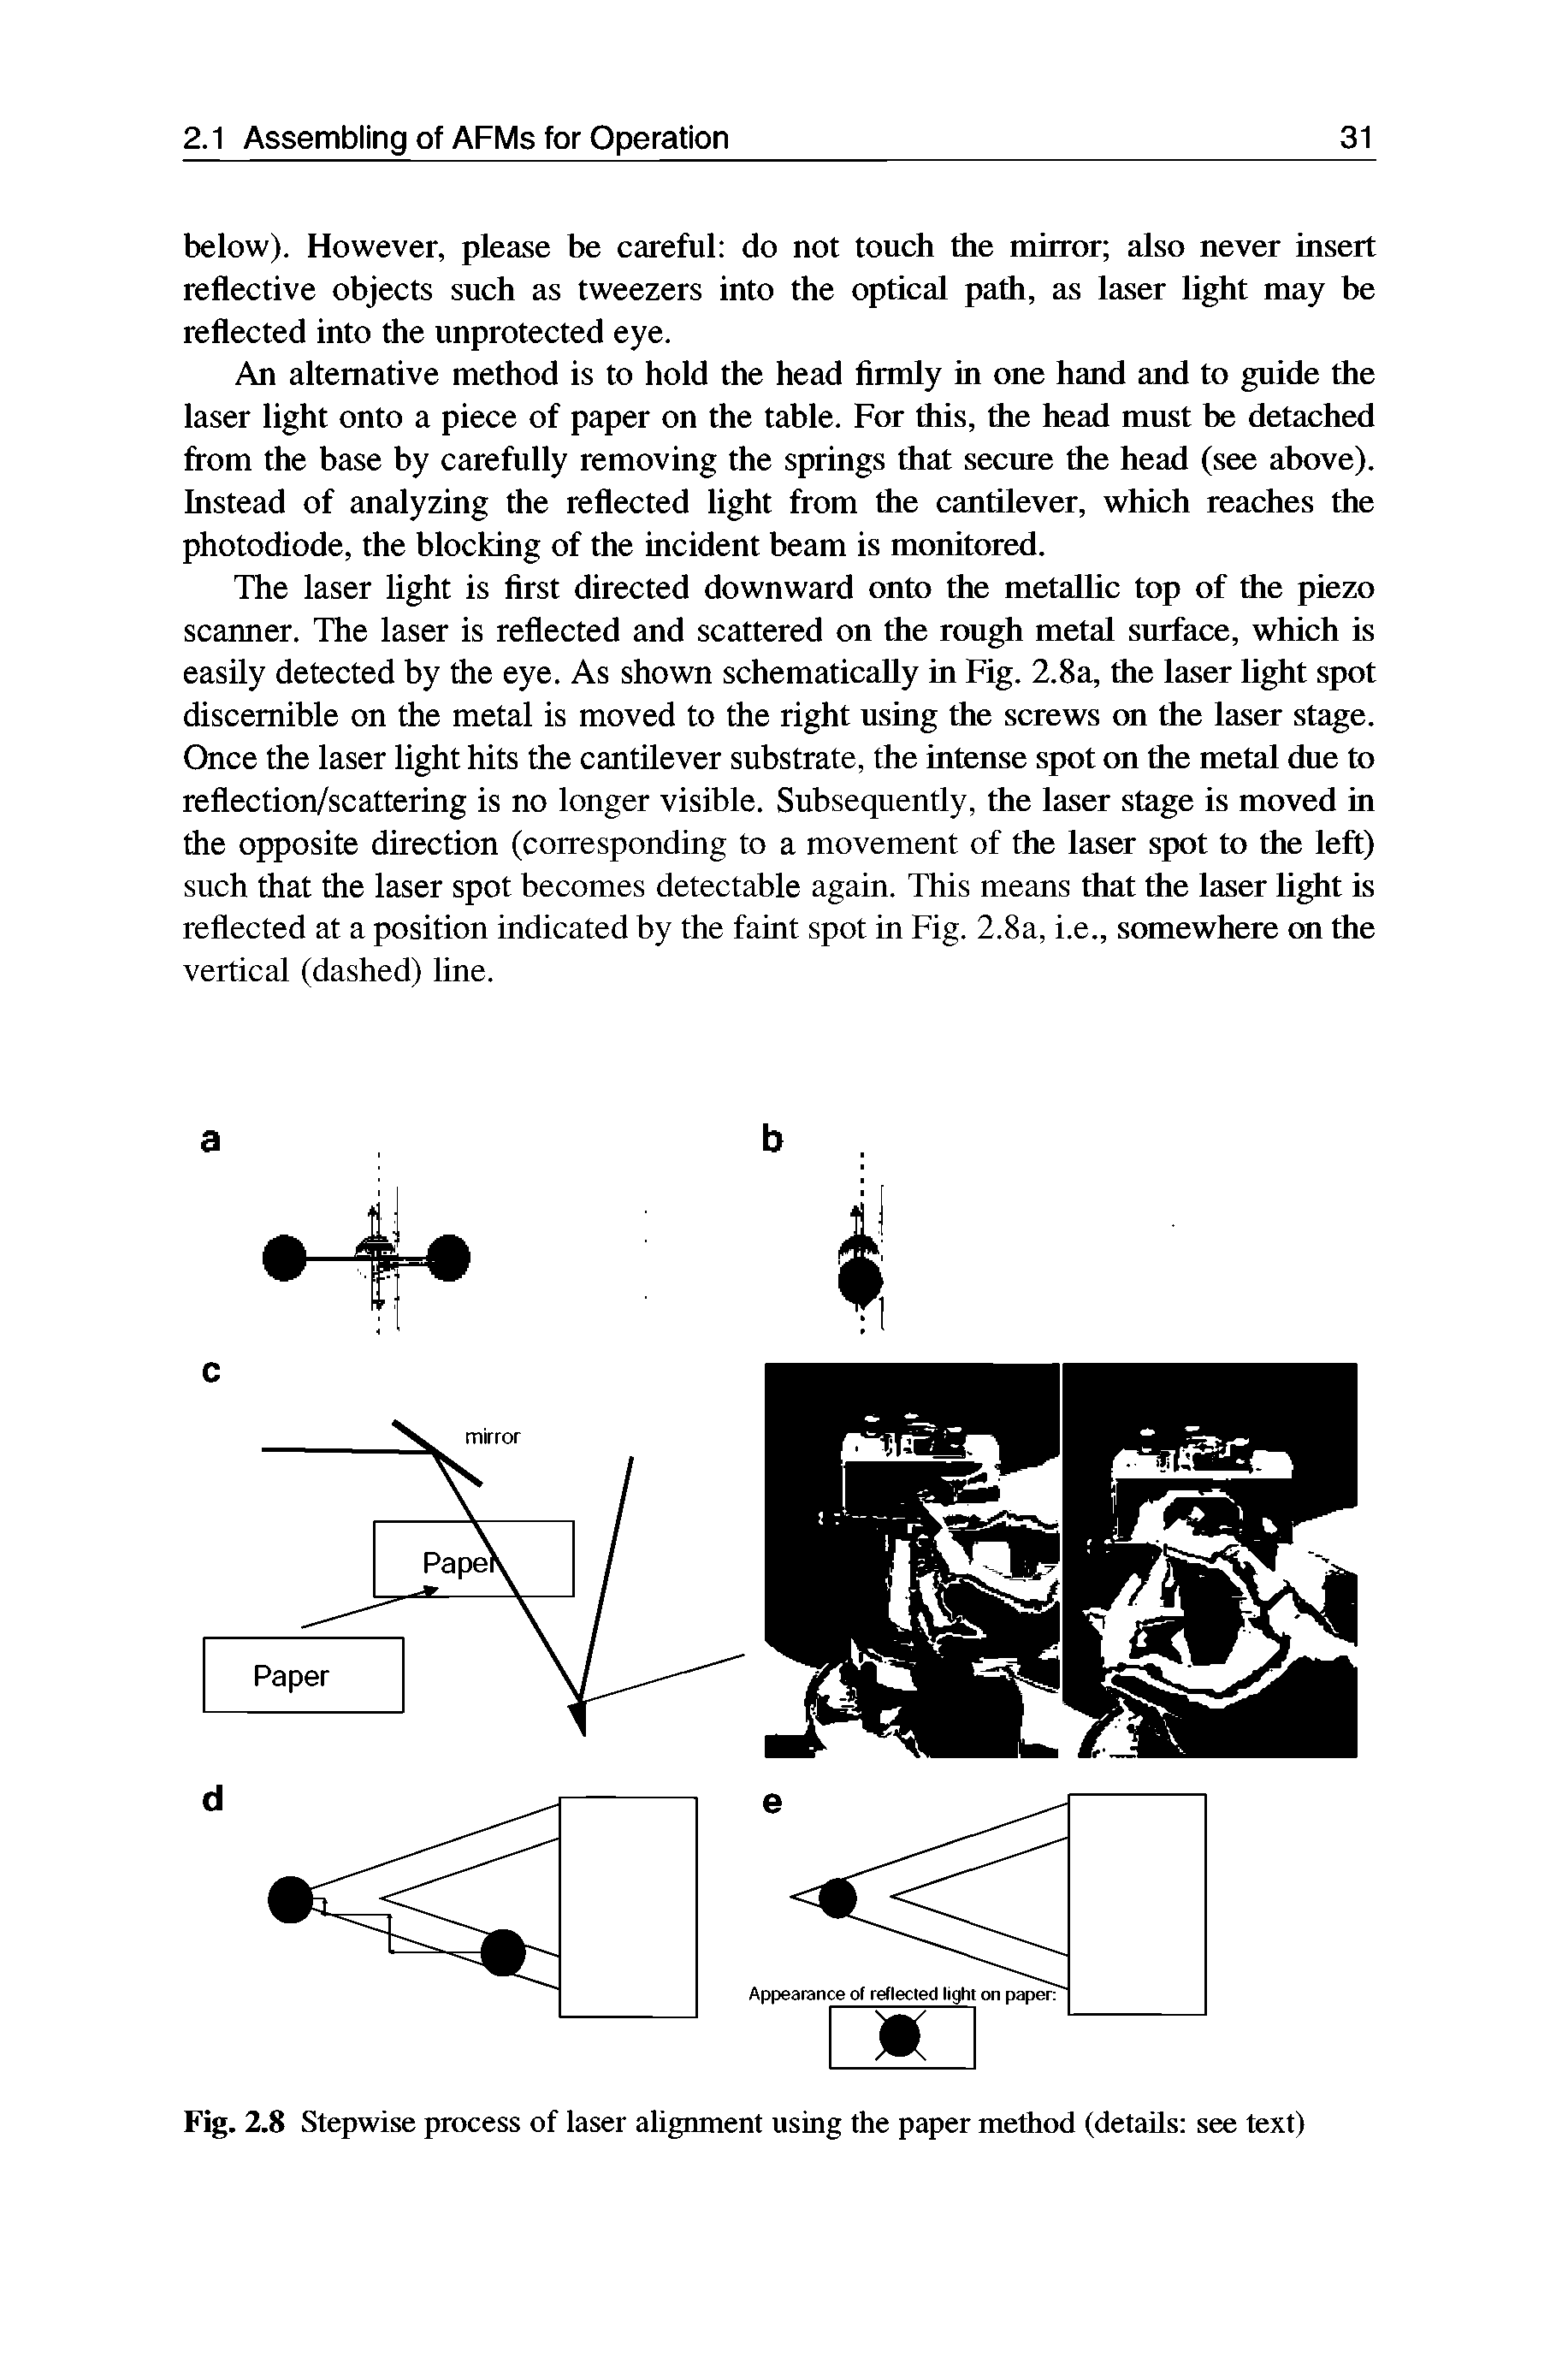 Fig. 2.8 Stepwise process of laser alignment using the paper method (details see text)...